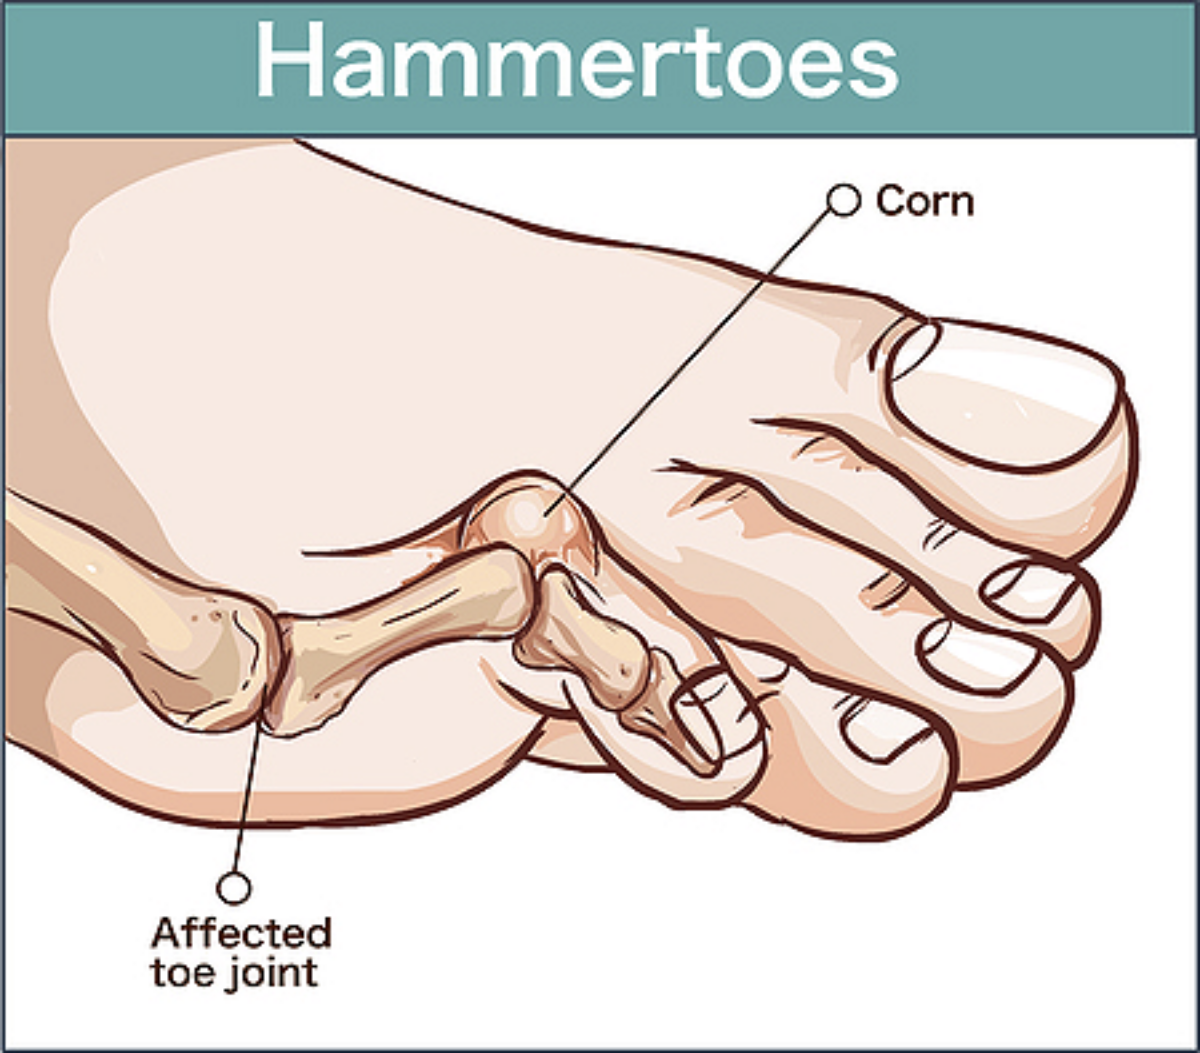 What Does a Hammer Toe Look Like & What Causes It?